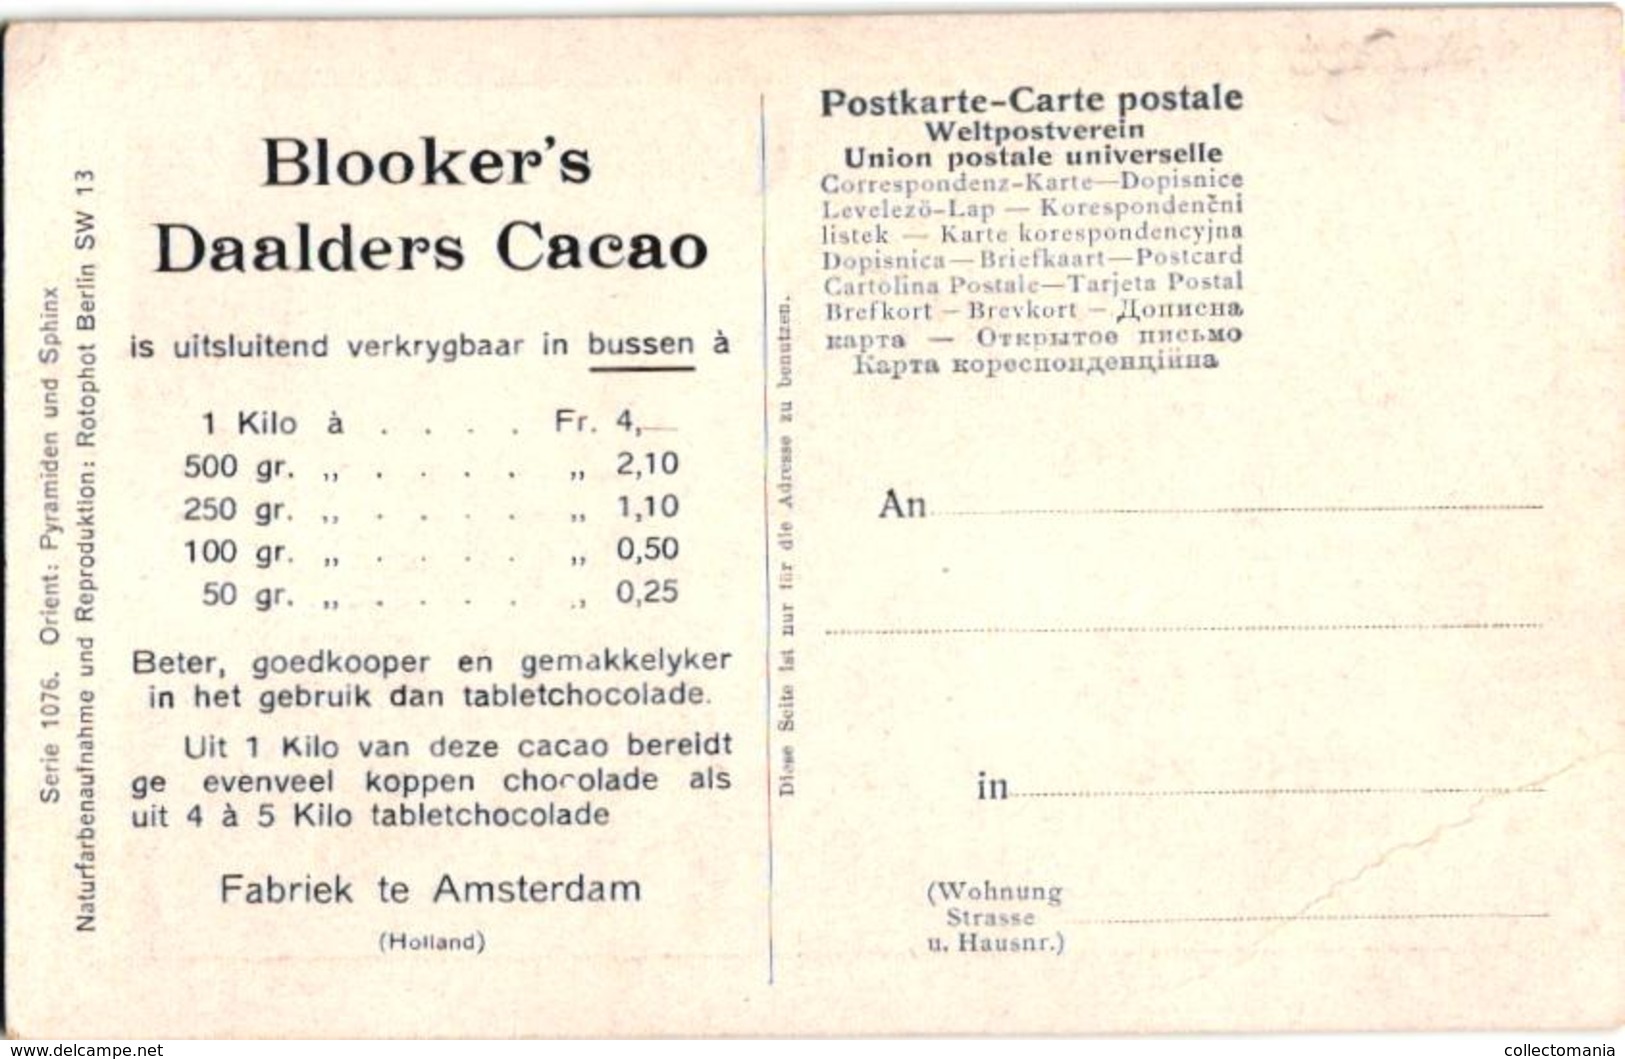 8 post cards c1900 Cacao Chocolat  Blooker's Holland Daalders Grrece Cheops Egypte Akropolis  1076 Orient